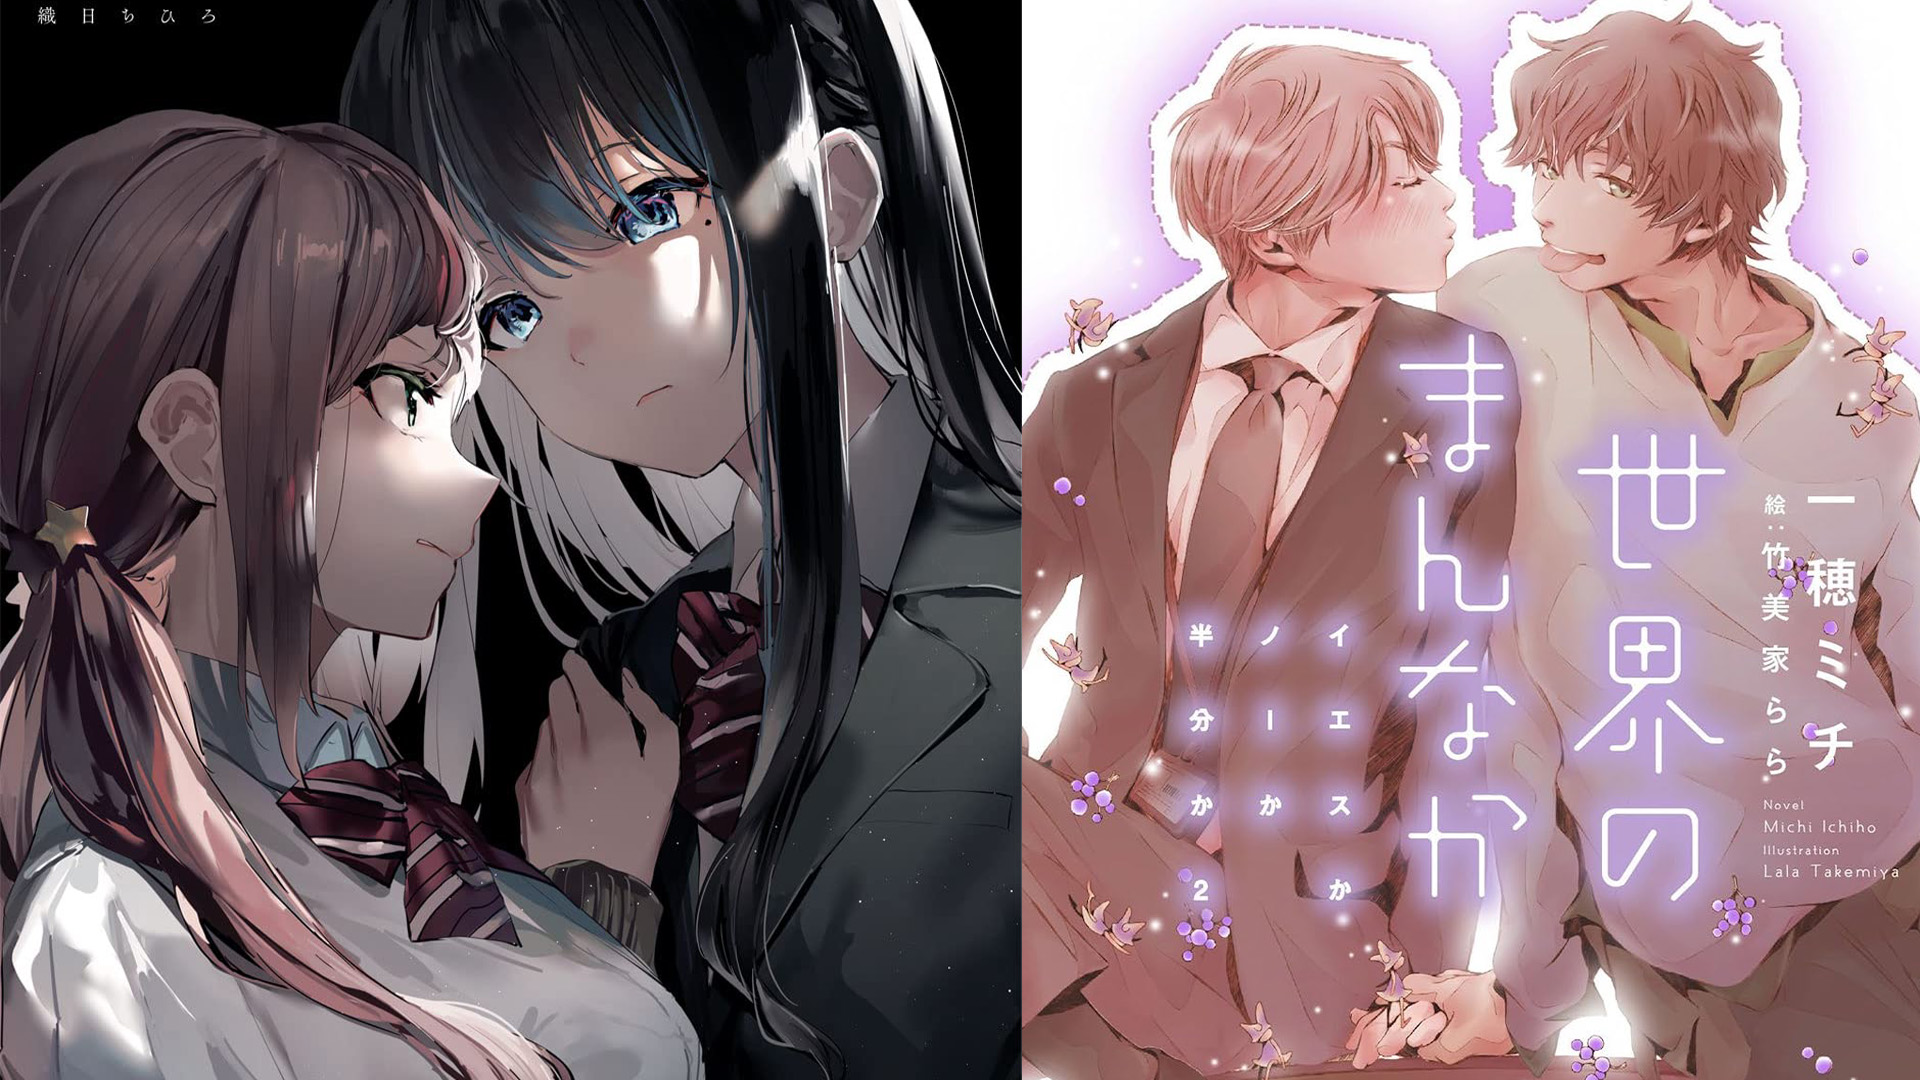 Seven Seas Reveals Six New Manga Acquisitions for Western Release: We Got Yuri, Boys Love, and More